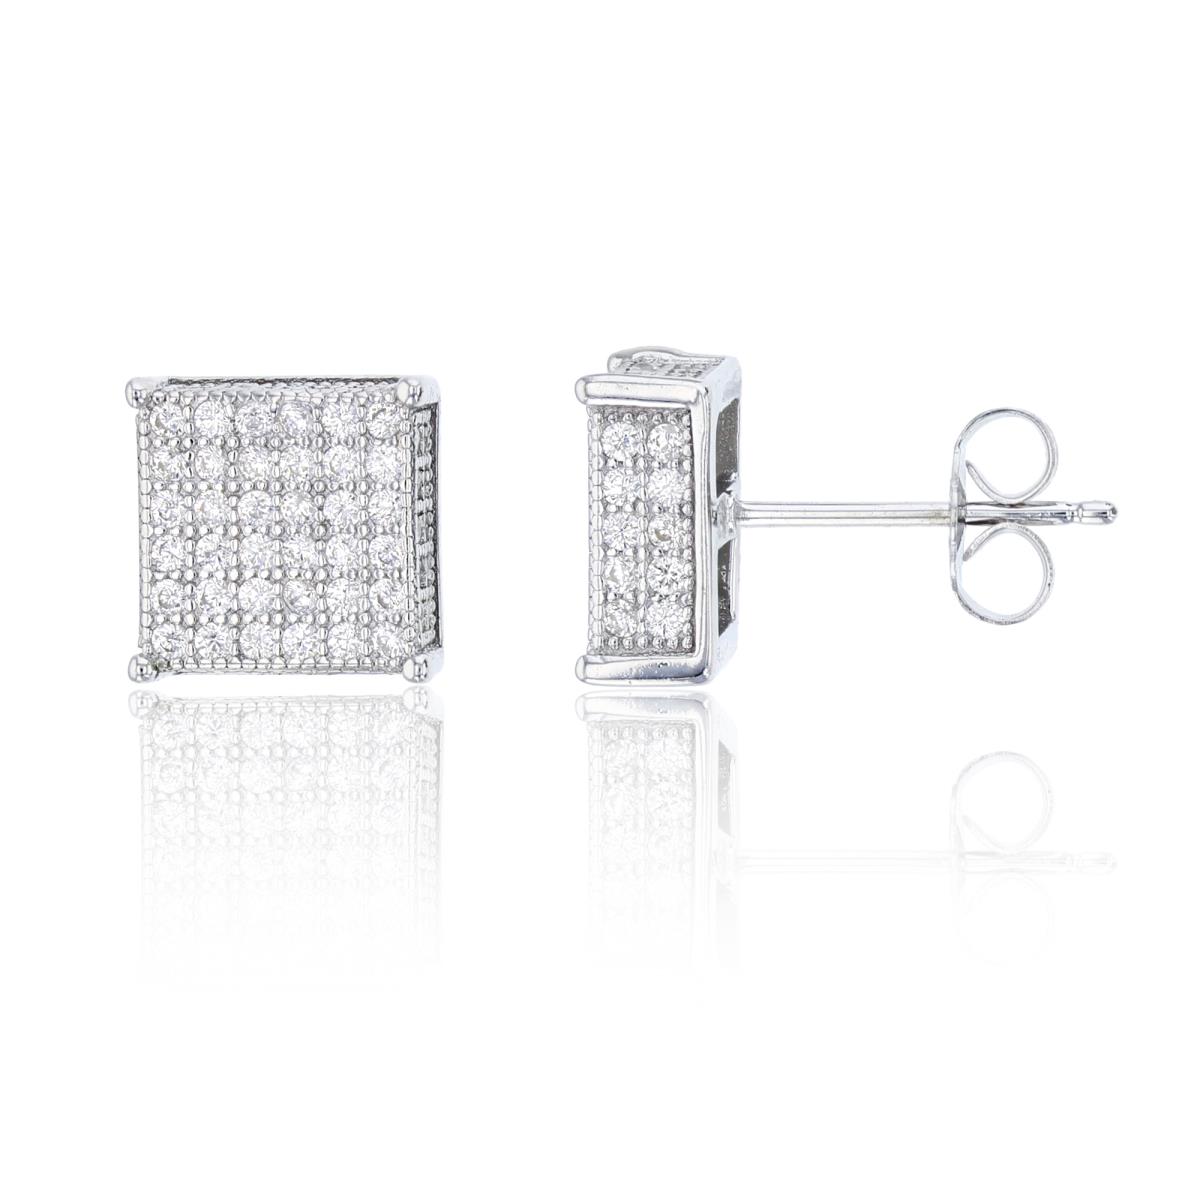 Sterling Silver Rhodium 10x10mm Micropave 3D Square Stud Earring